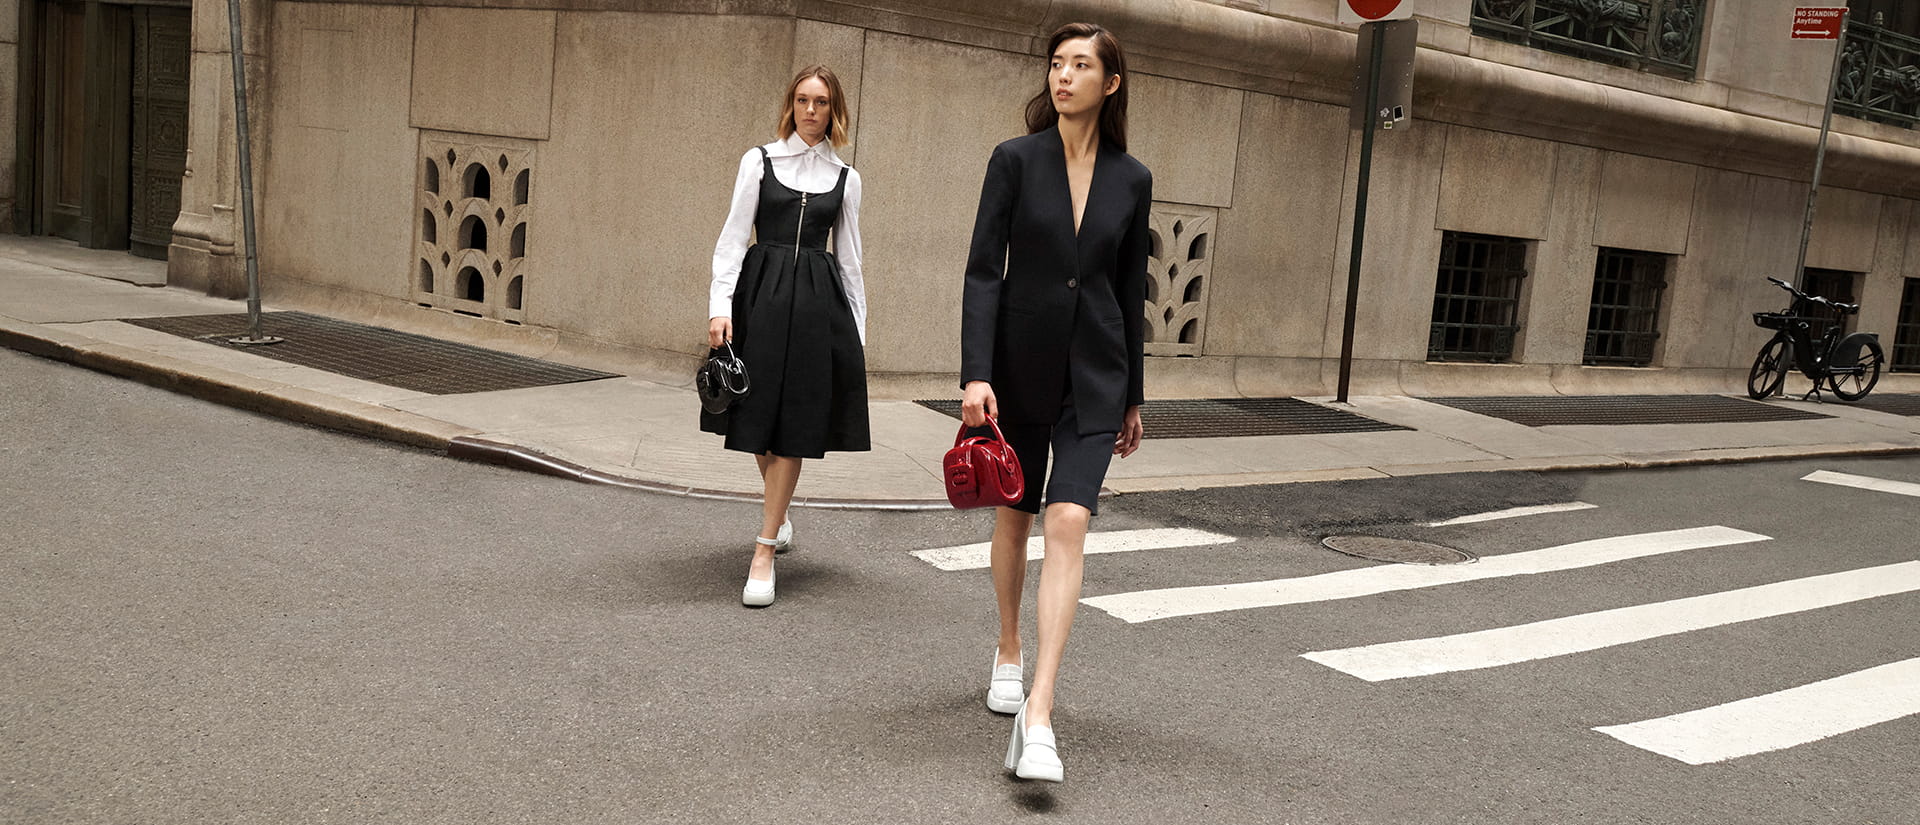 Lula patent belted bag in black and red; Lula patent platform loafers in light grey; Lula patent chunky heel pumps in light grey - CHARLES & KEITH